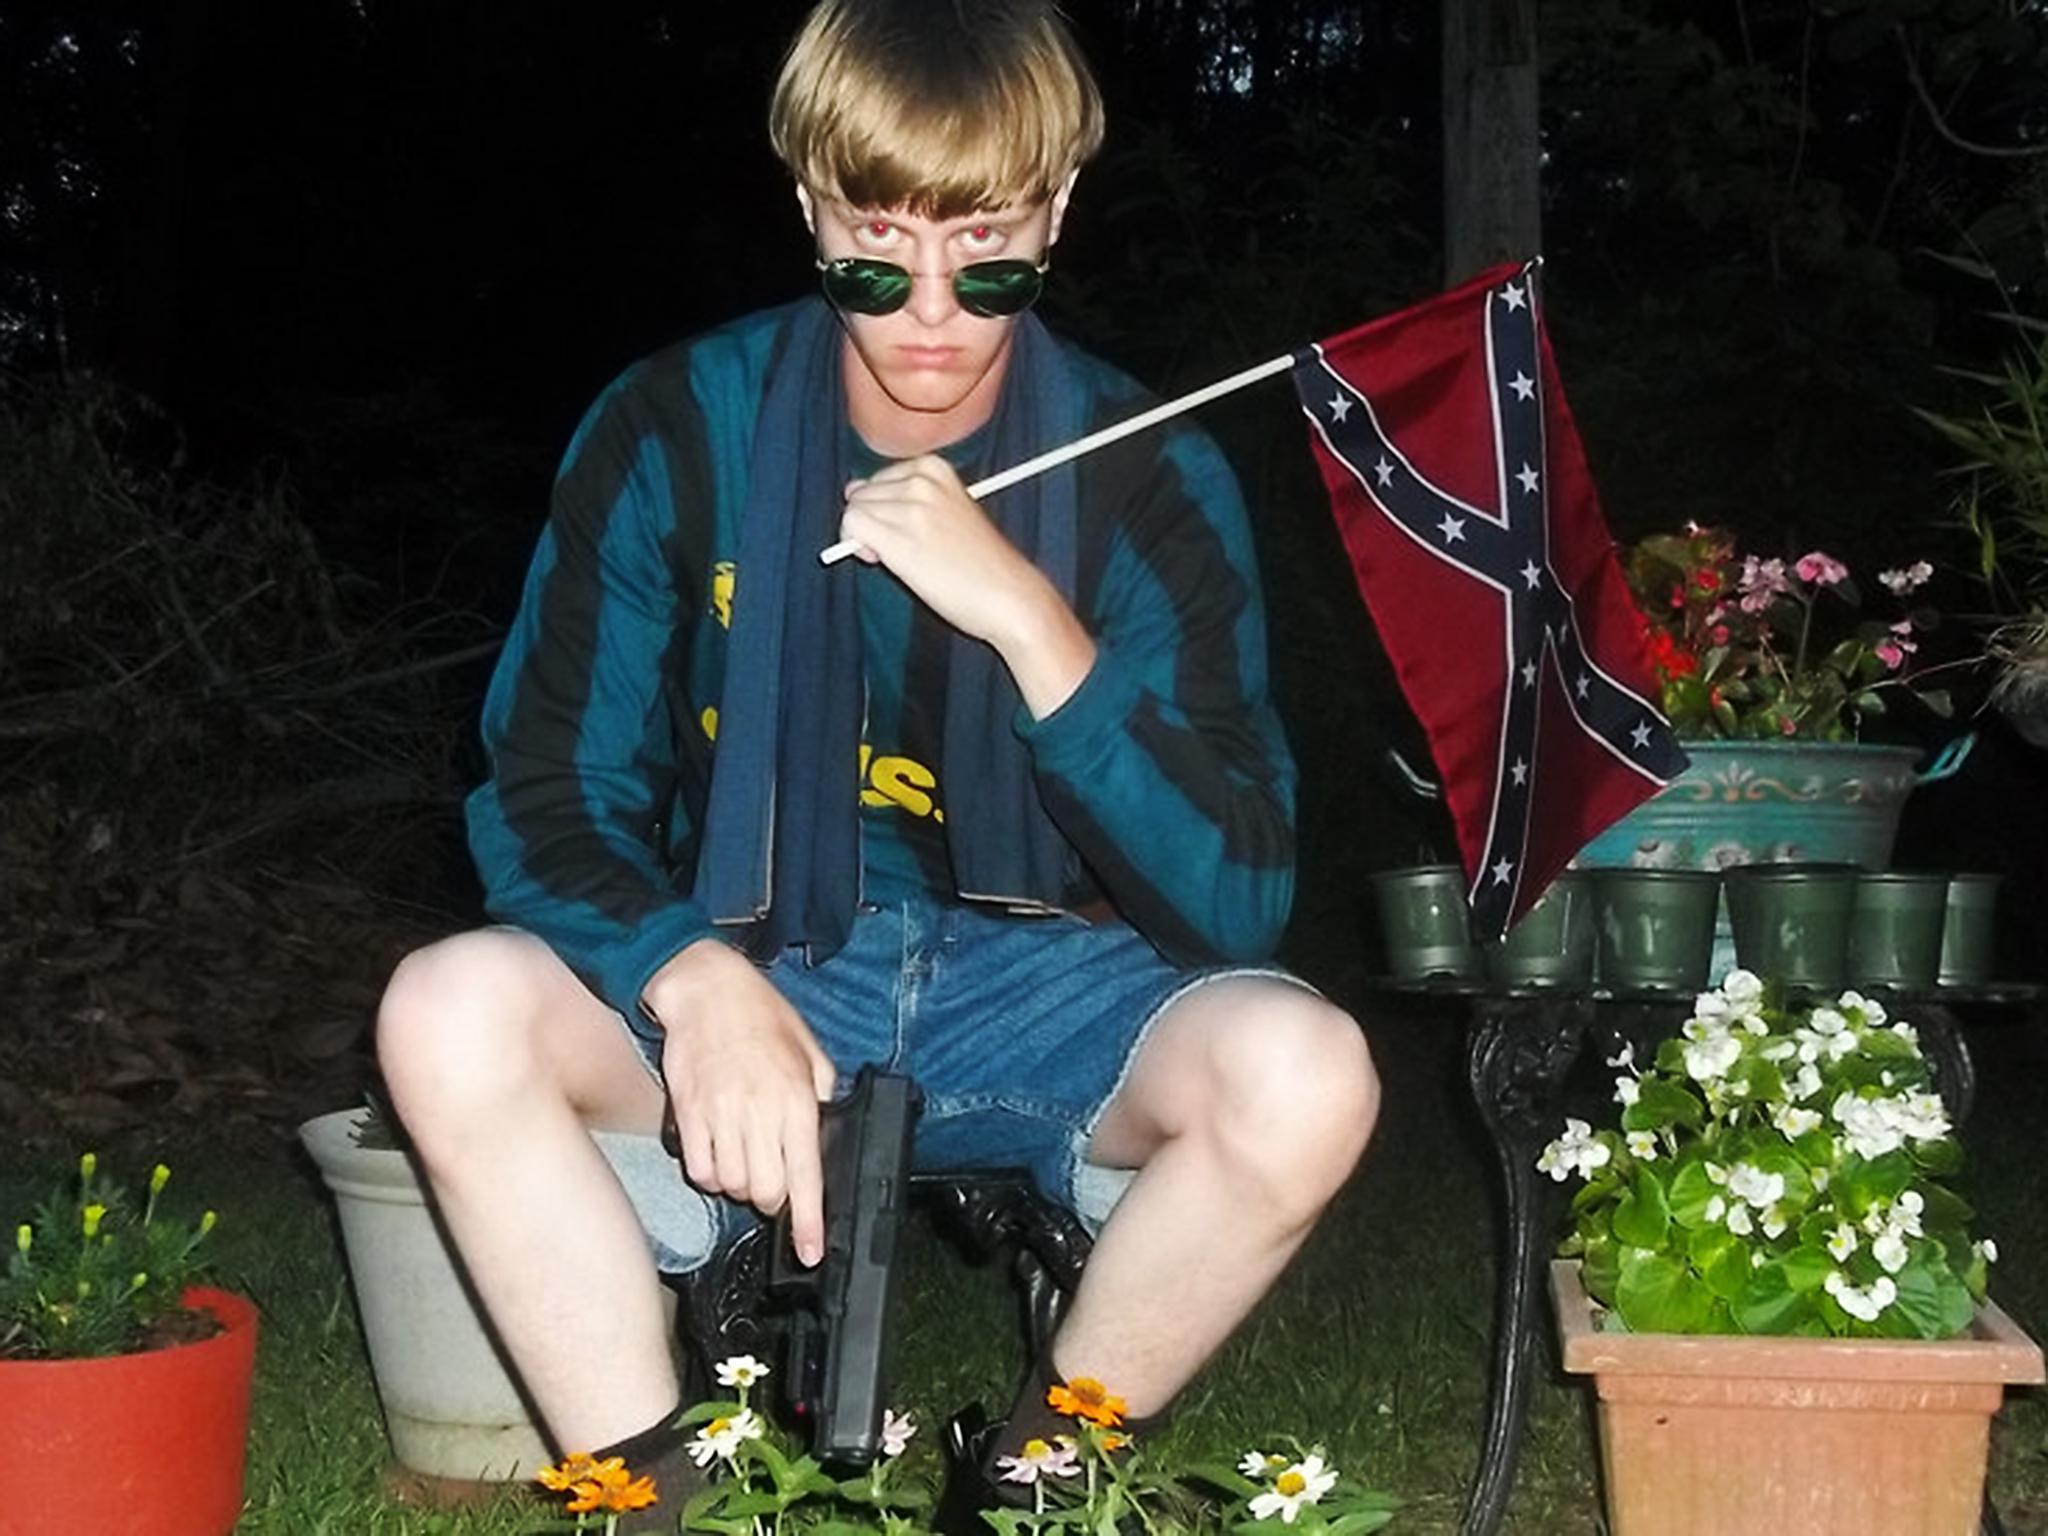 Breitbart published a defence of the Confederate flag two weeks after images emerged, following his massacre of African American churchgoers, of white supremacist Dylann Roof brandishing it